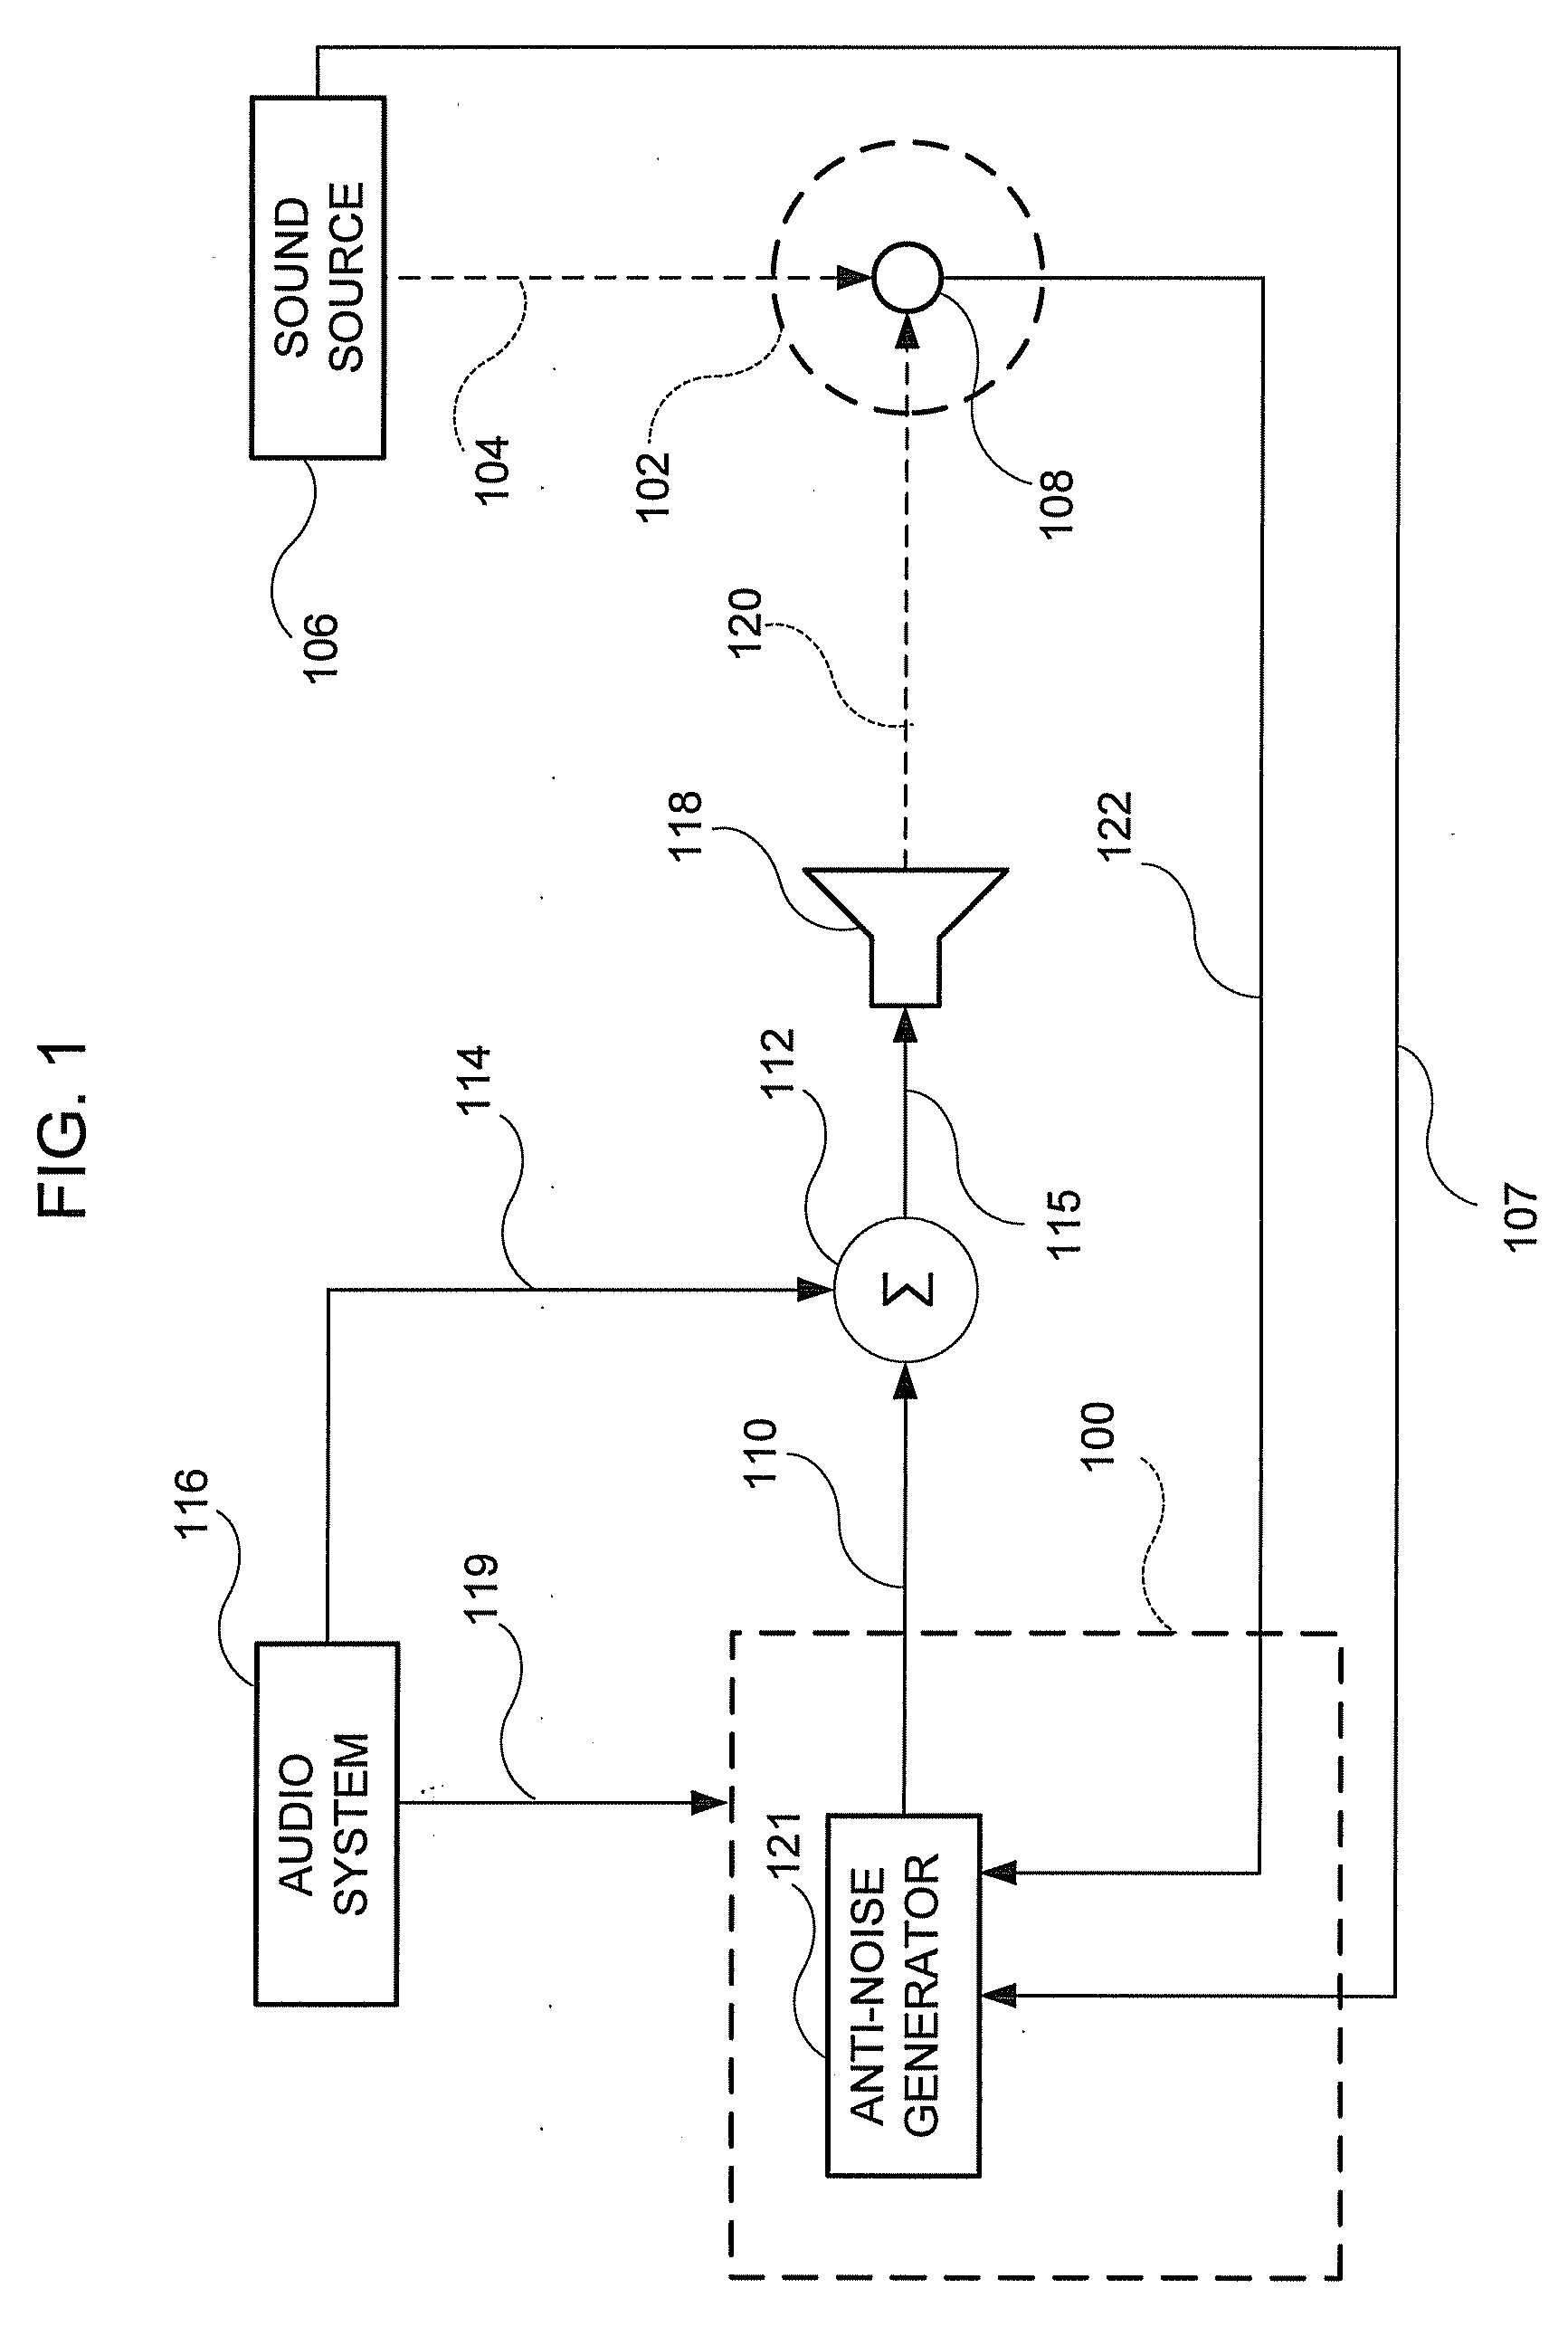 System for active noise control based on audio system output